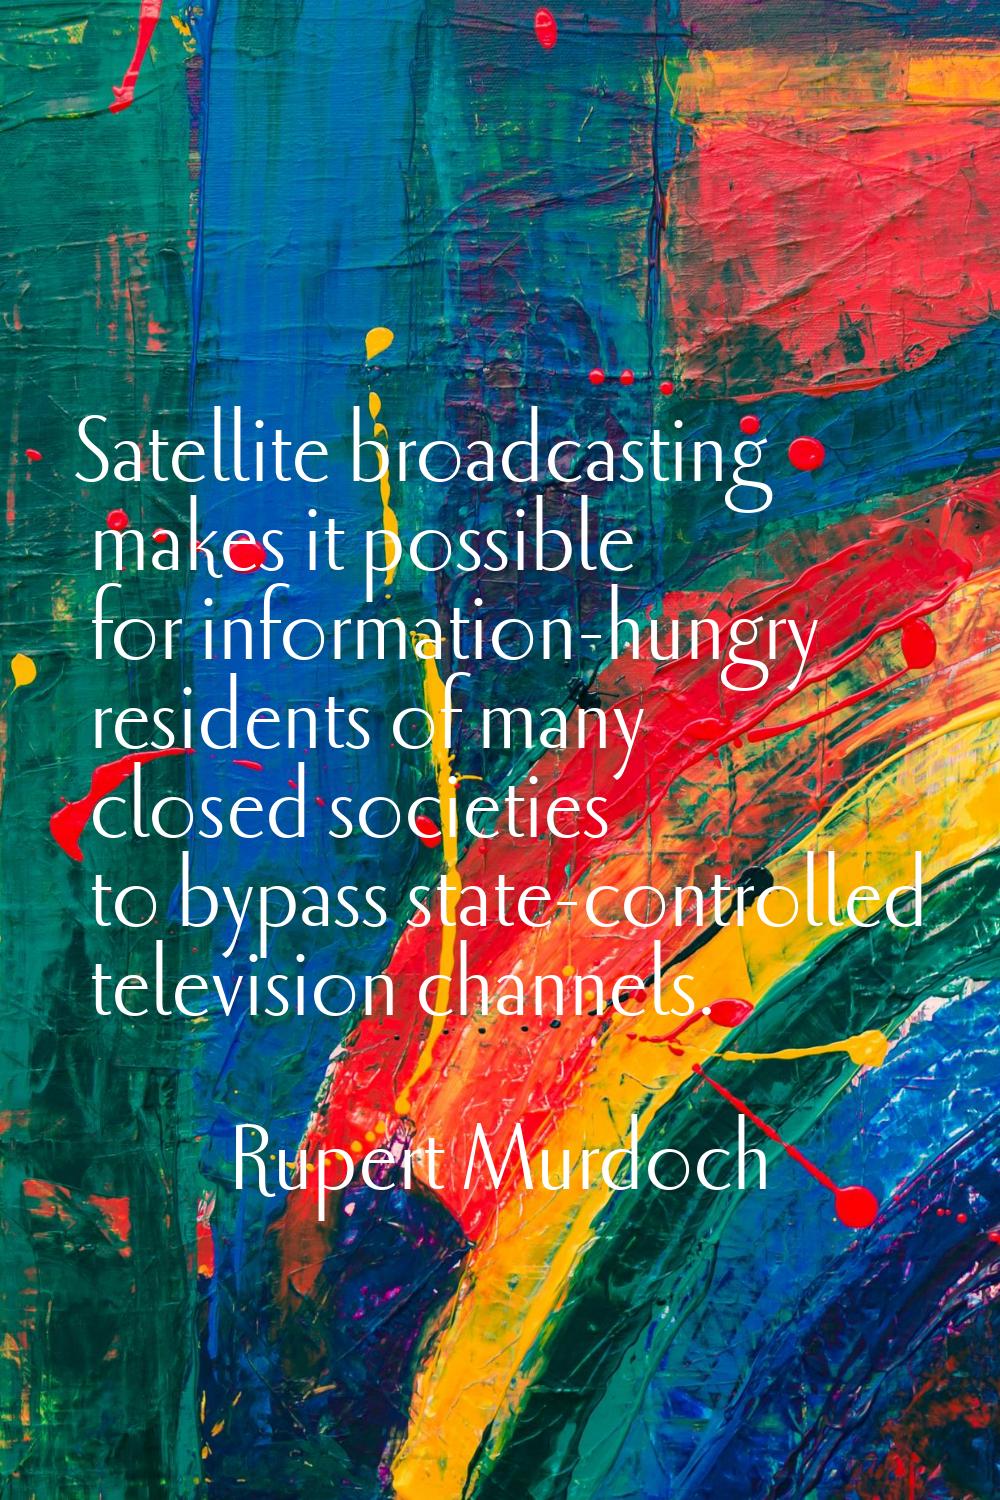 Satellite broadcasting makes it possible for information-hungry residents of many closed societies 